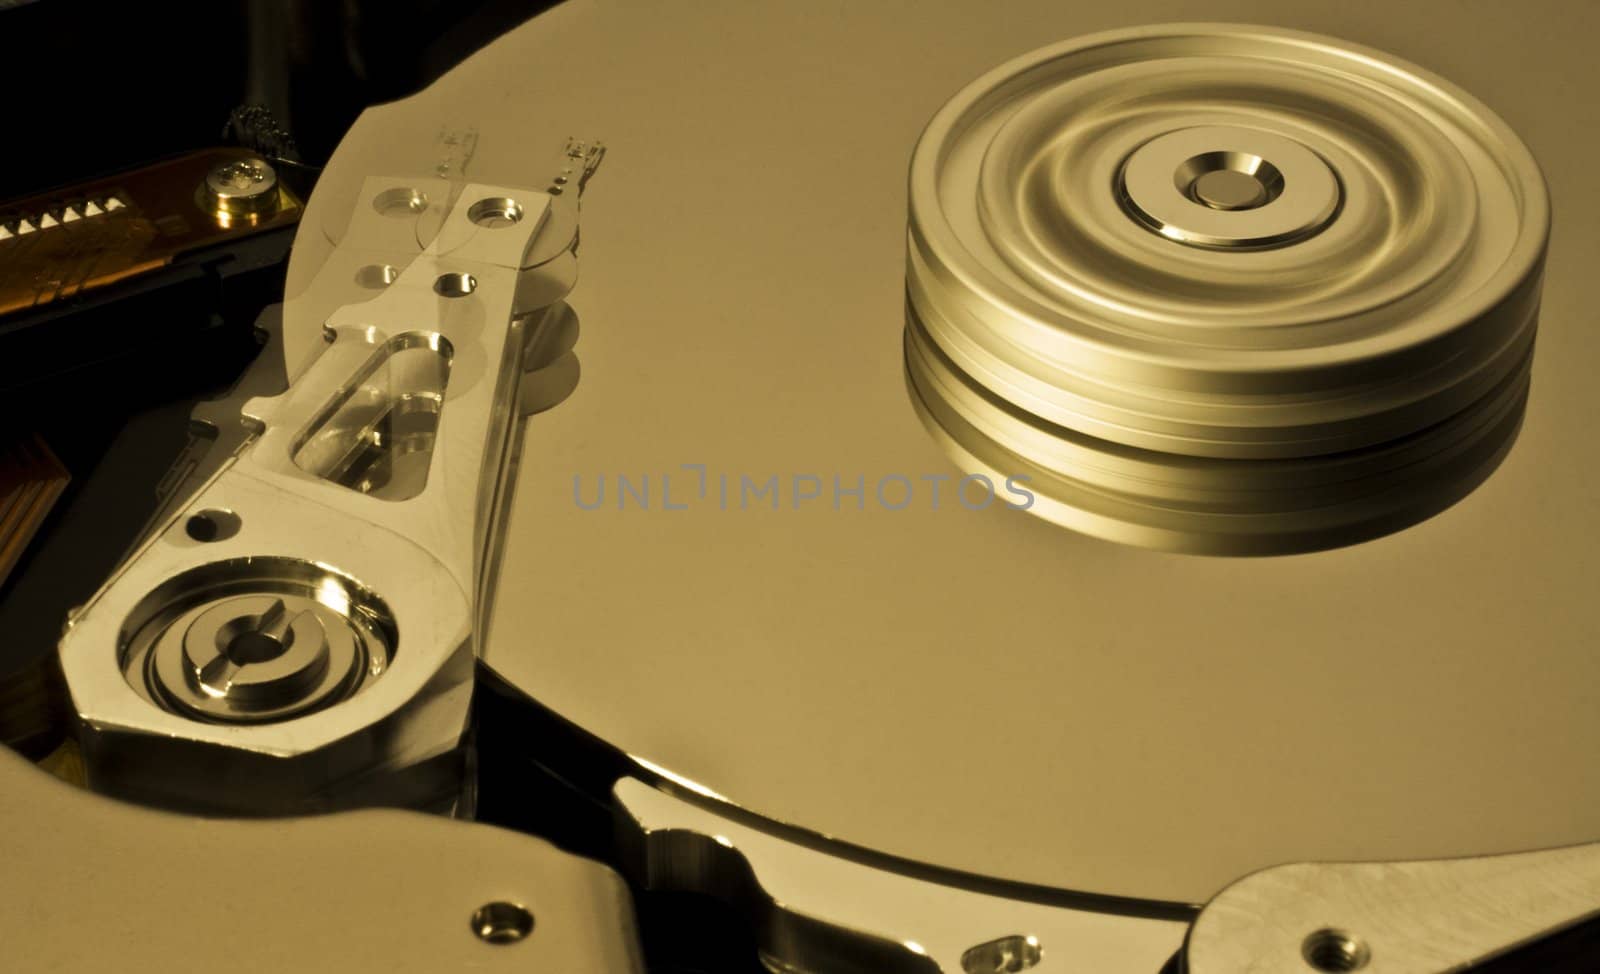 Hard disk drive with moving head and spinning platter. Nice motion blur.